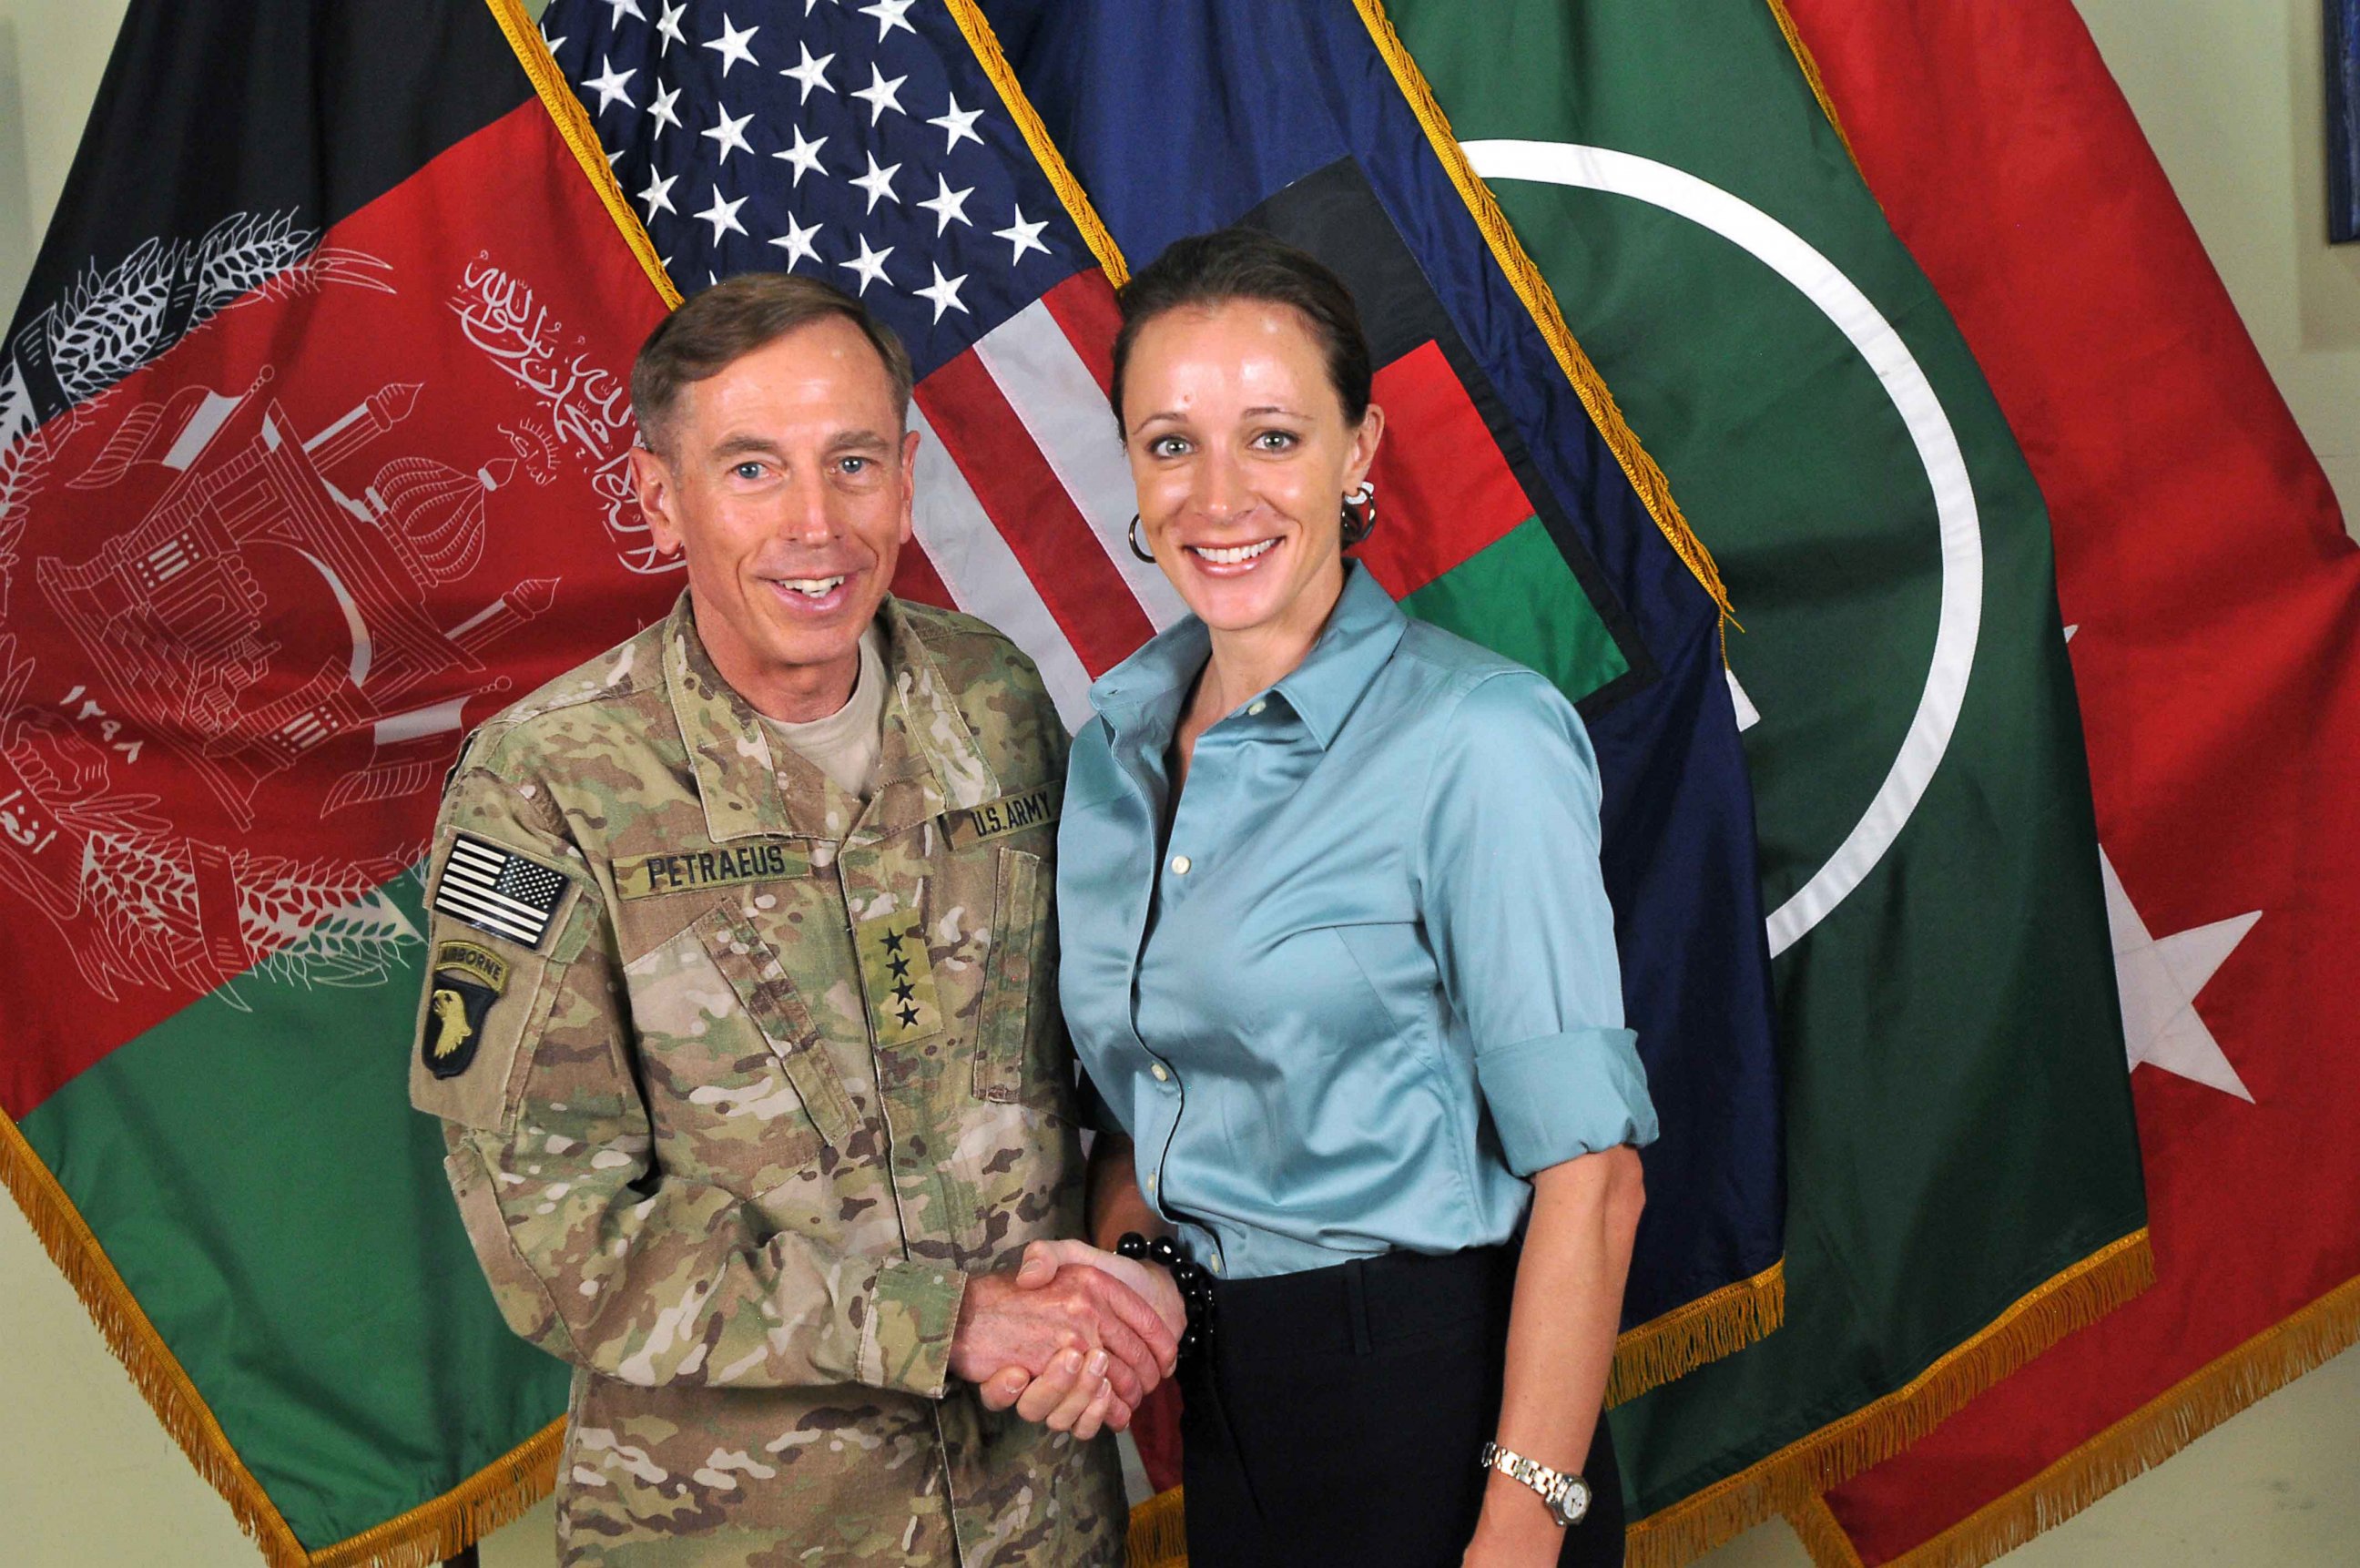 PHOTO: In this handout image provided by the International Security Assistance Force, former Commander of International Security Assistance Force and U.S. Forces-Afghanistan; CIA Director Gen. Davis Petraeus shakes hands with biographer Paula Broadwell.